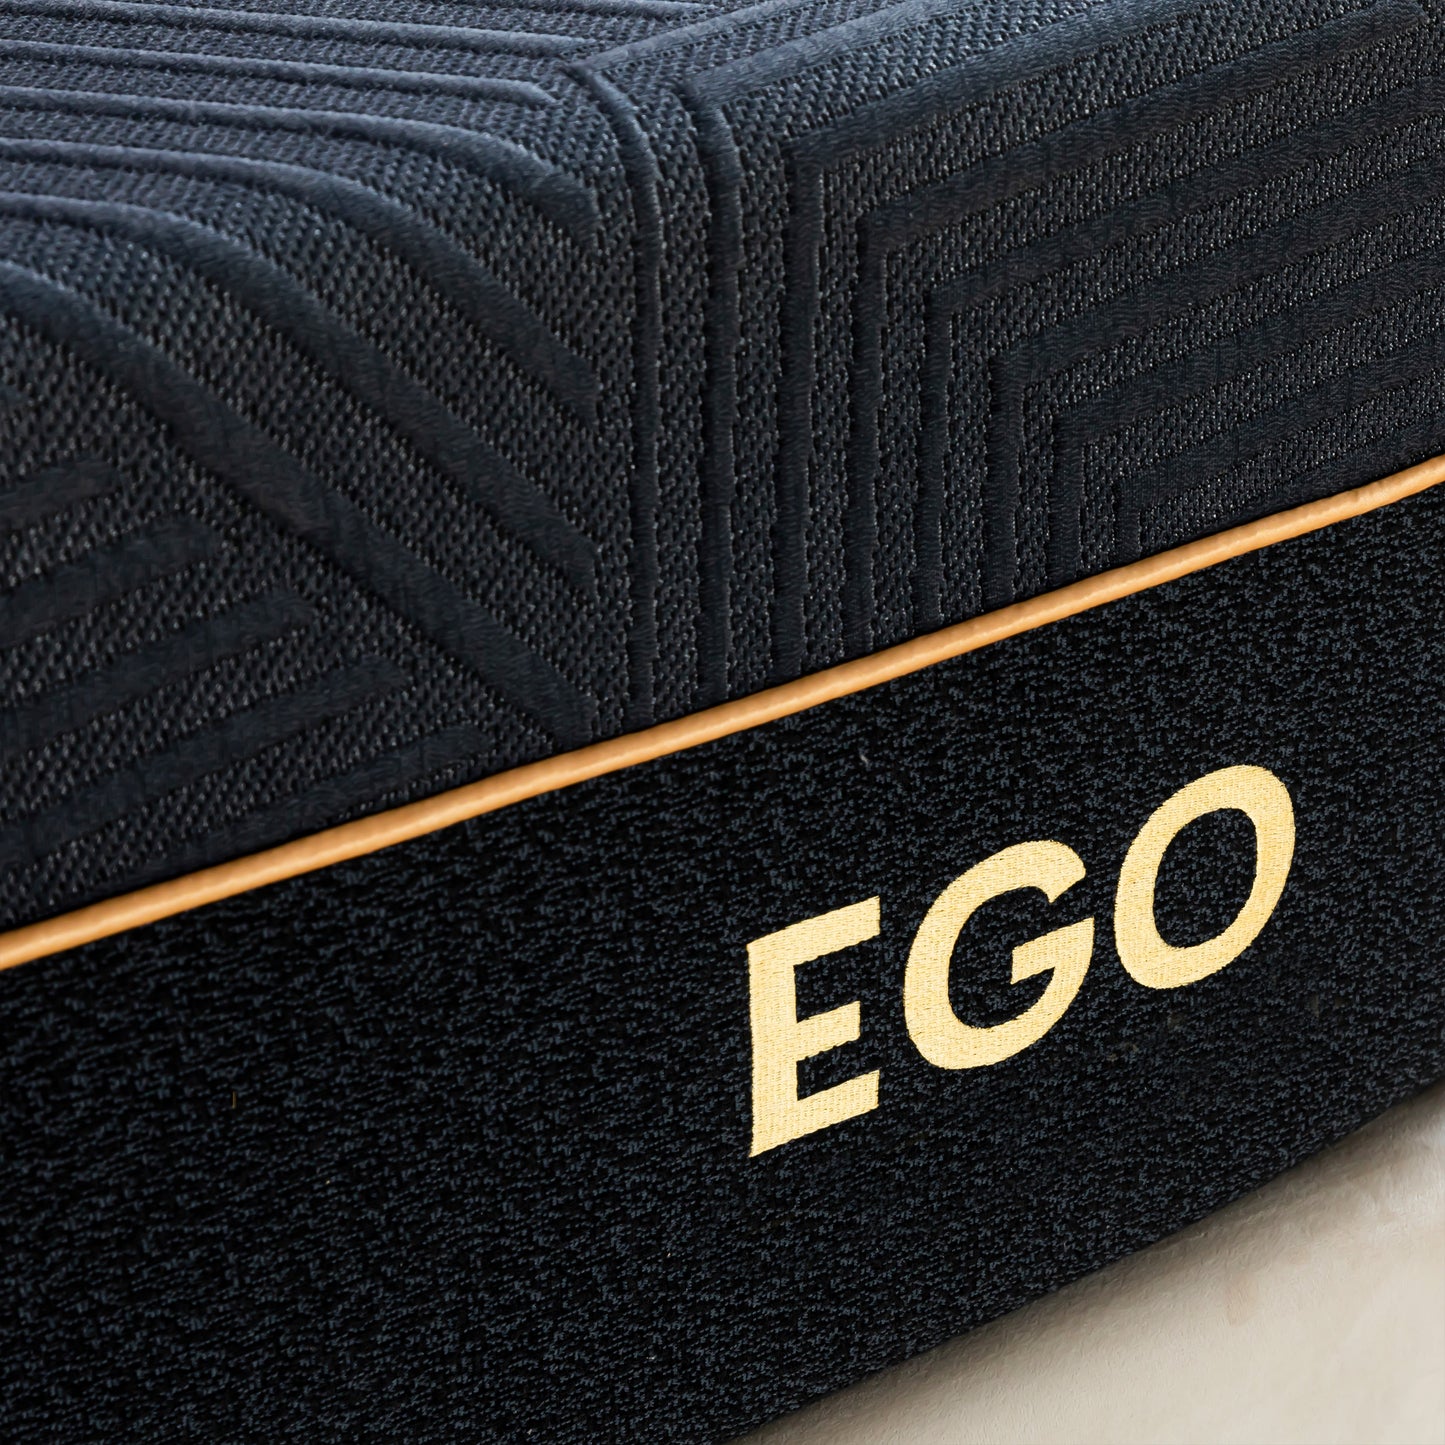 EGO Black 14" Firm Memory Foam Mattress with Cooling Cover